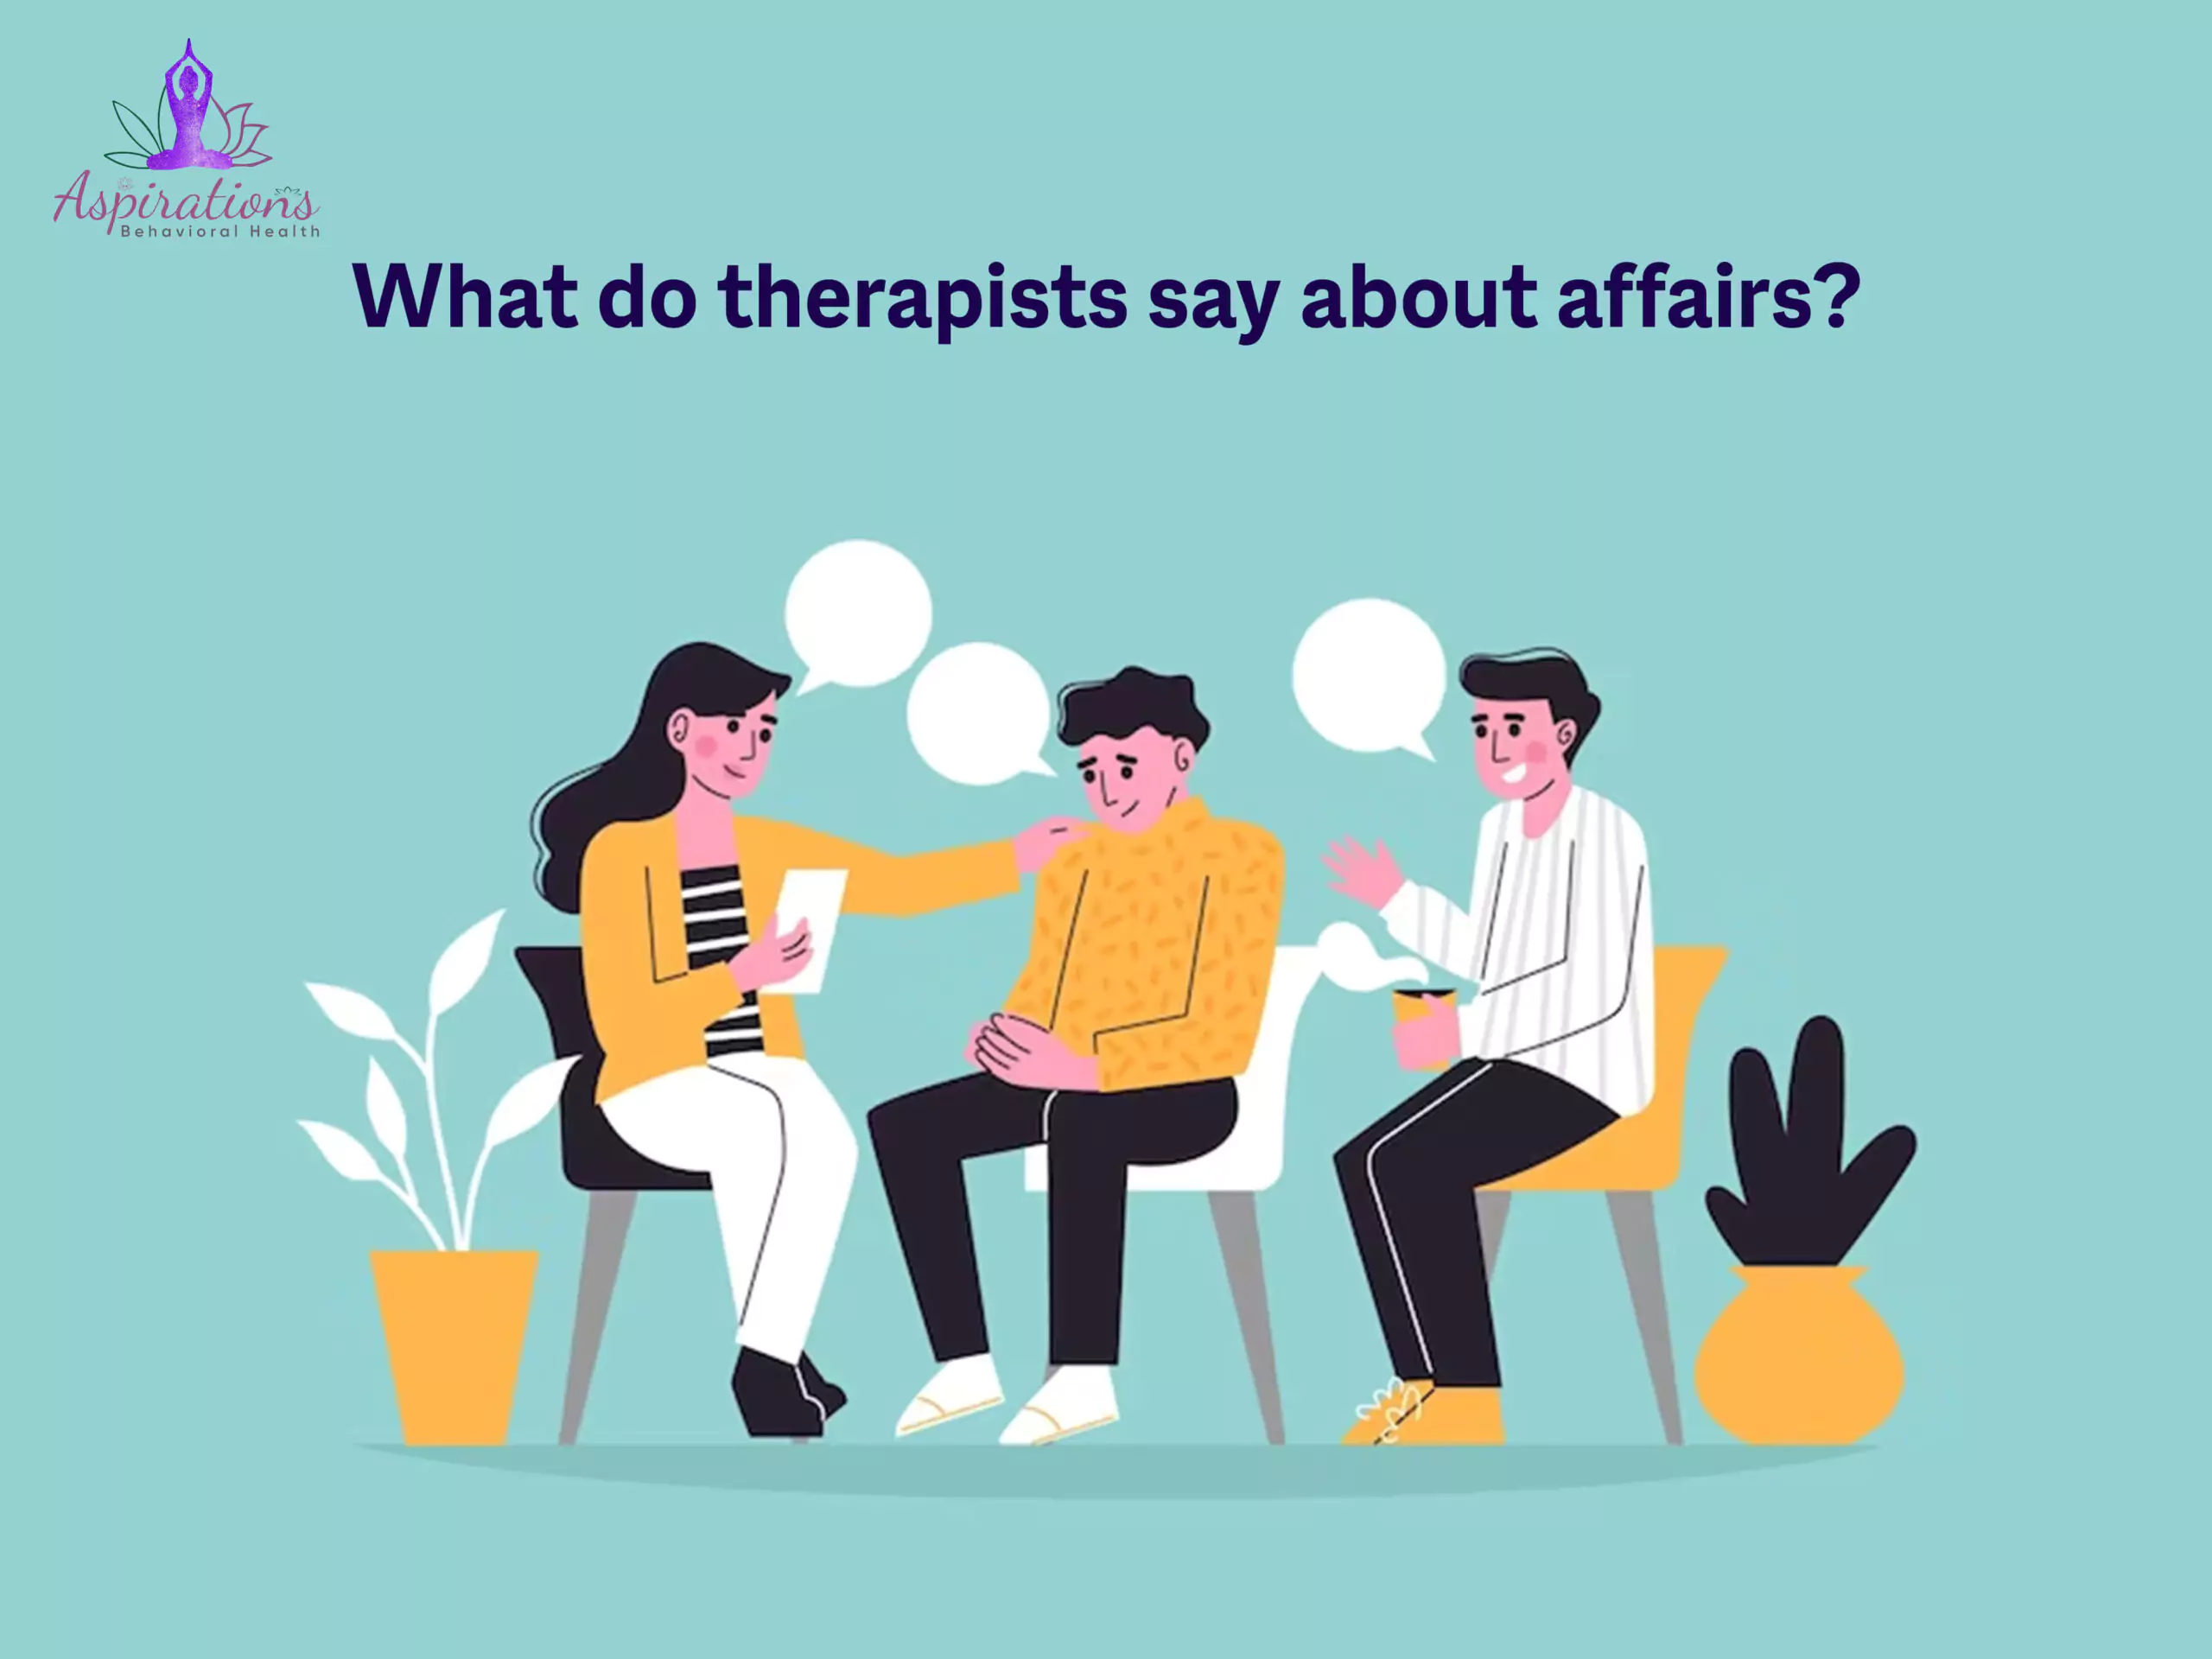 What do therapists say about affairs